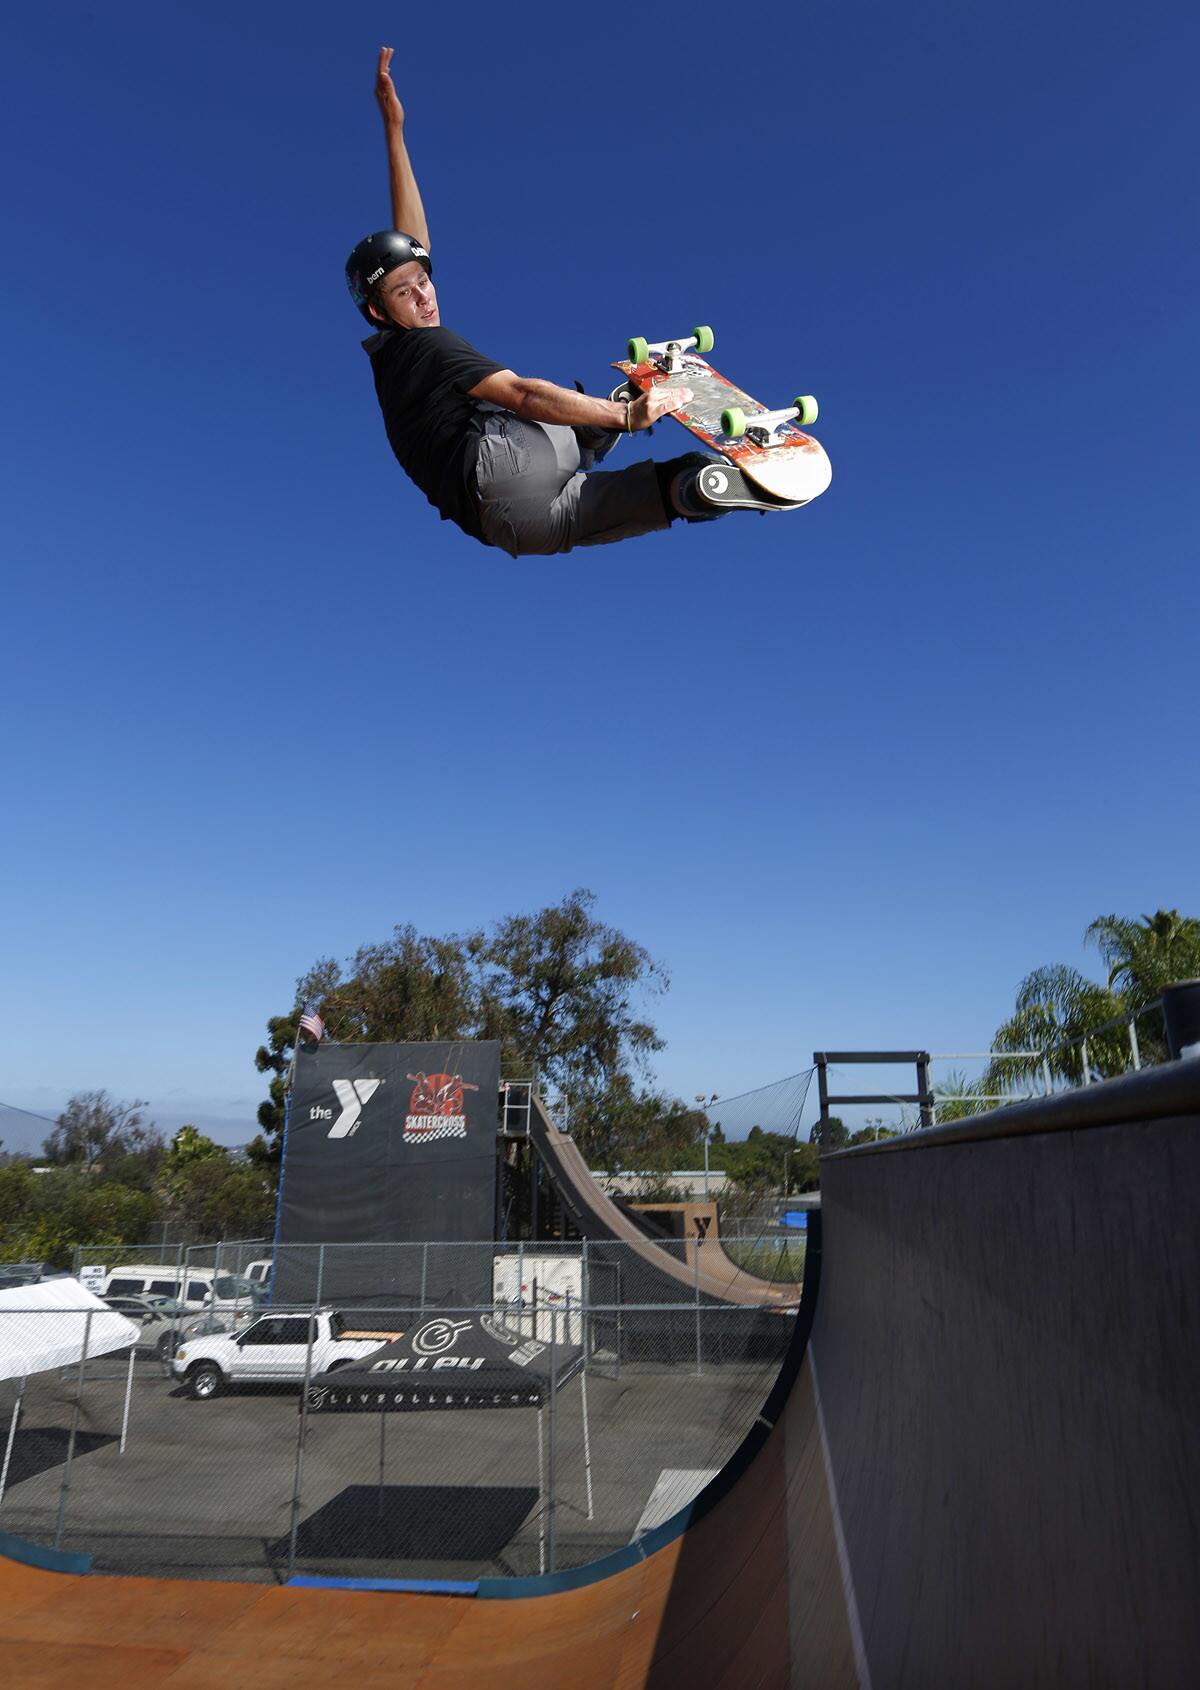 Skateboarder Jeromy Green will perform and compete at the Clash at Clairemont Saturday at the Mission Valley YMCA Krause Family Skate & Bike Park. (K.C. Alfred/San Diego Union-Tribune)